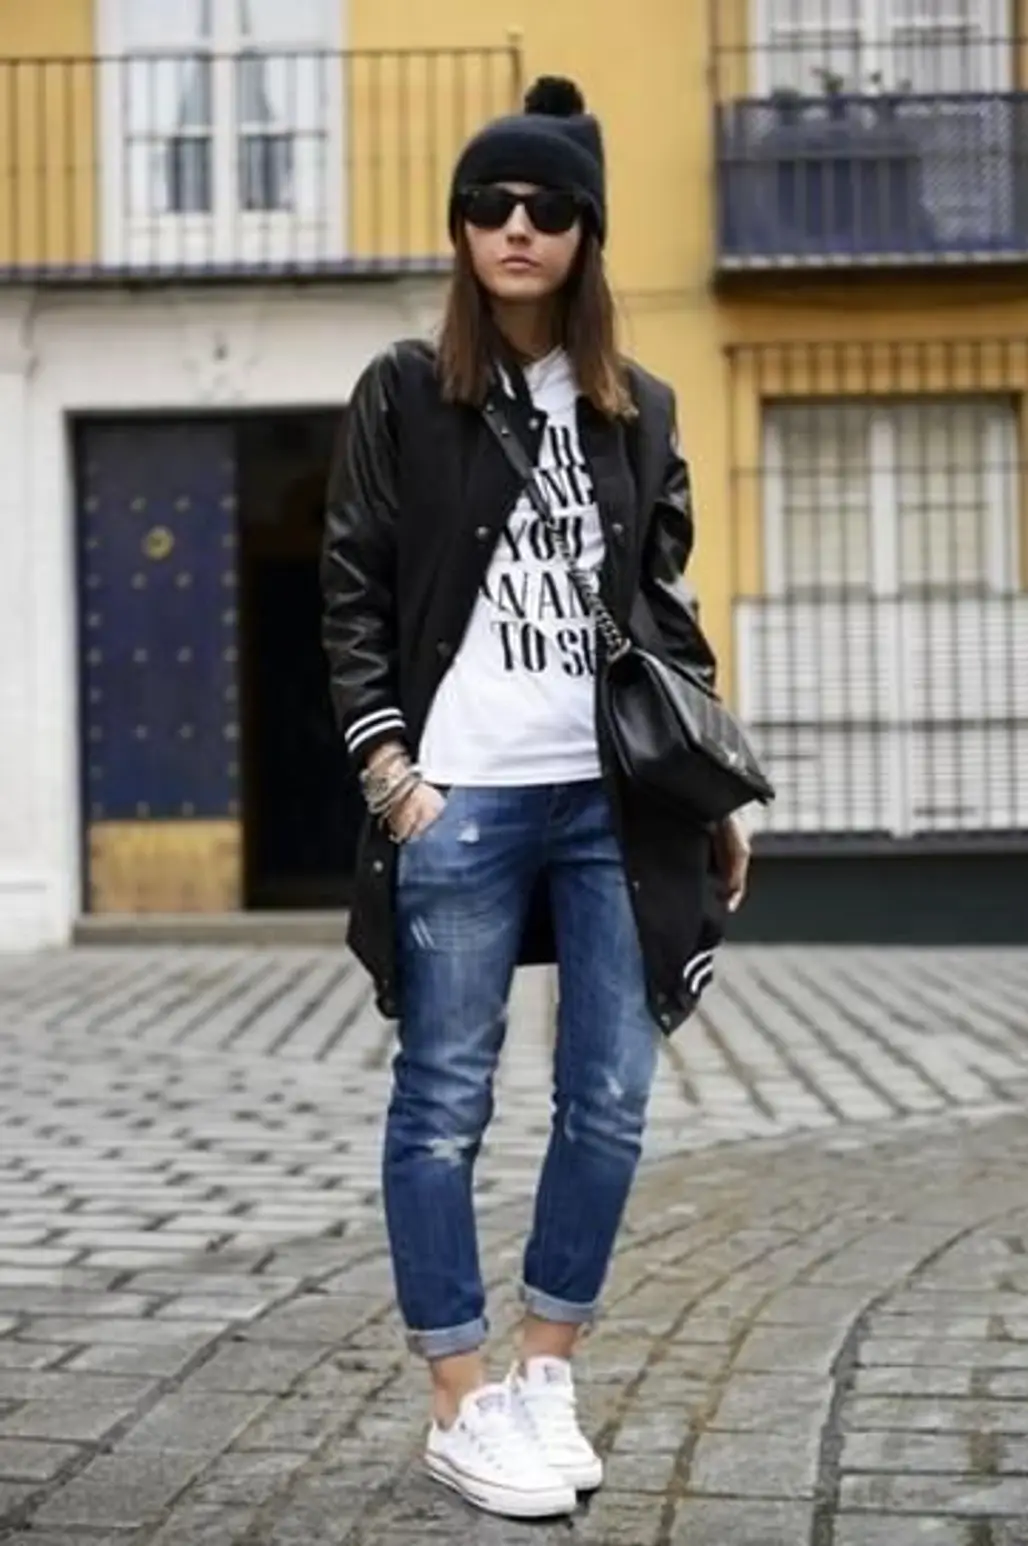 Graphic Tees, Leather, and White Sneakers Will Always Go Together, Period